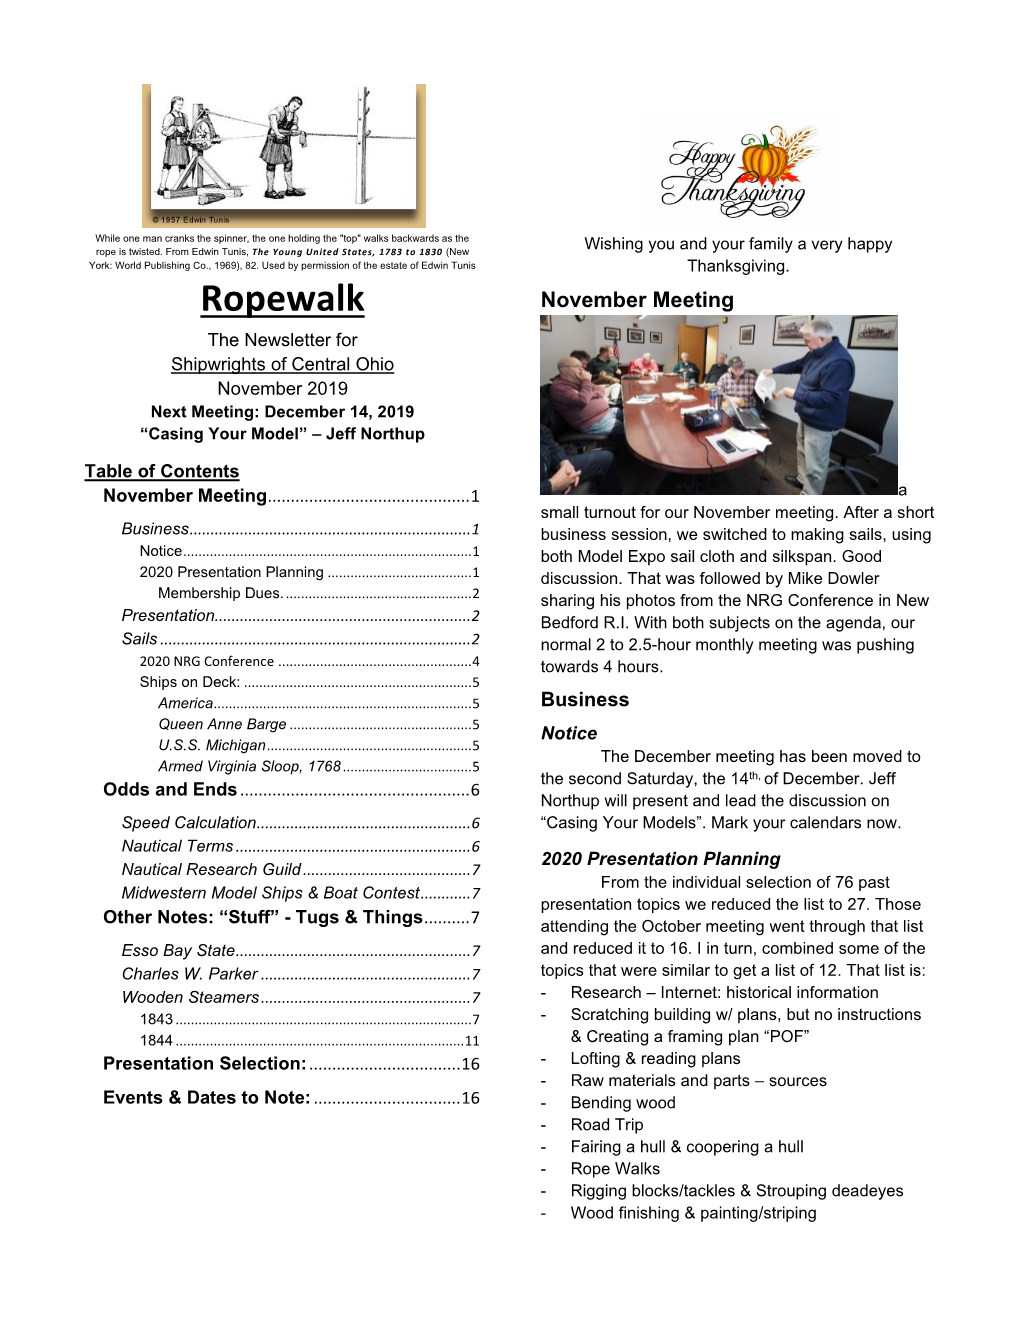 Ropewalk November Meeting the Newsletter for Shipwrights of Central Ohio November 2019 Next Meeting: December 14, 2019 “Casing Your Model” – Jeff Northup